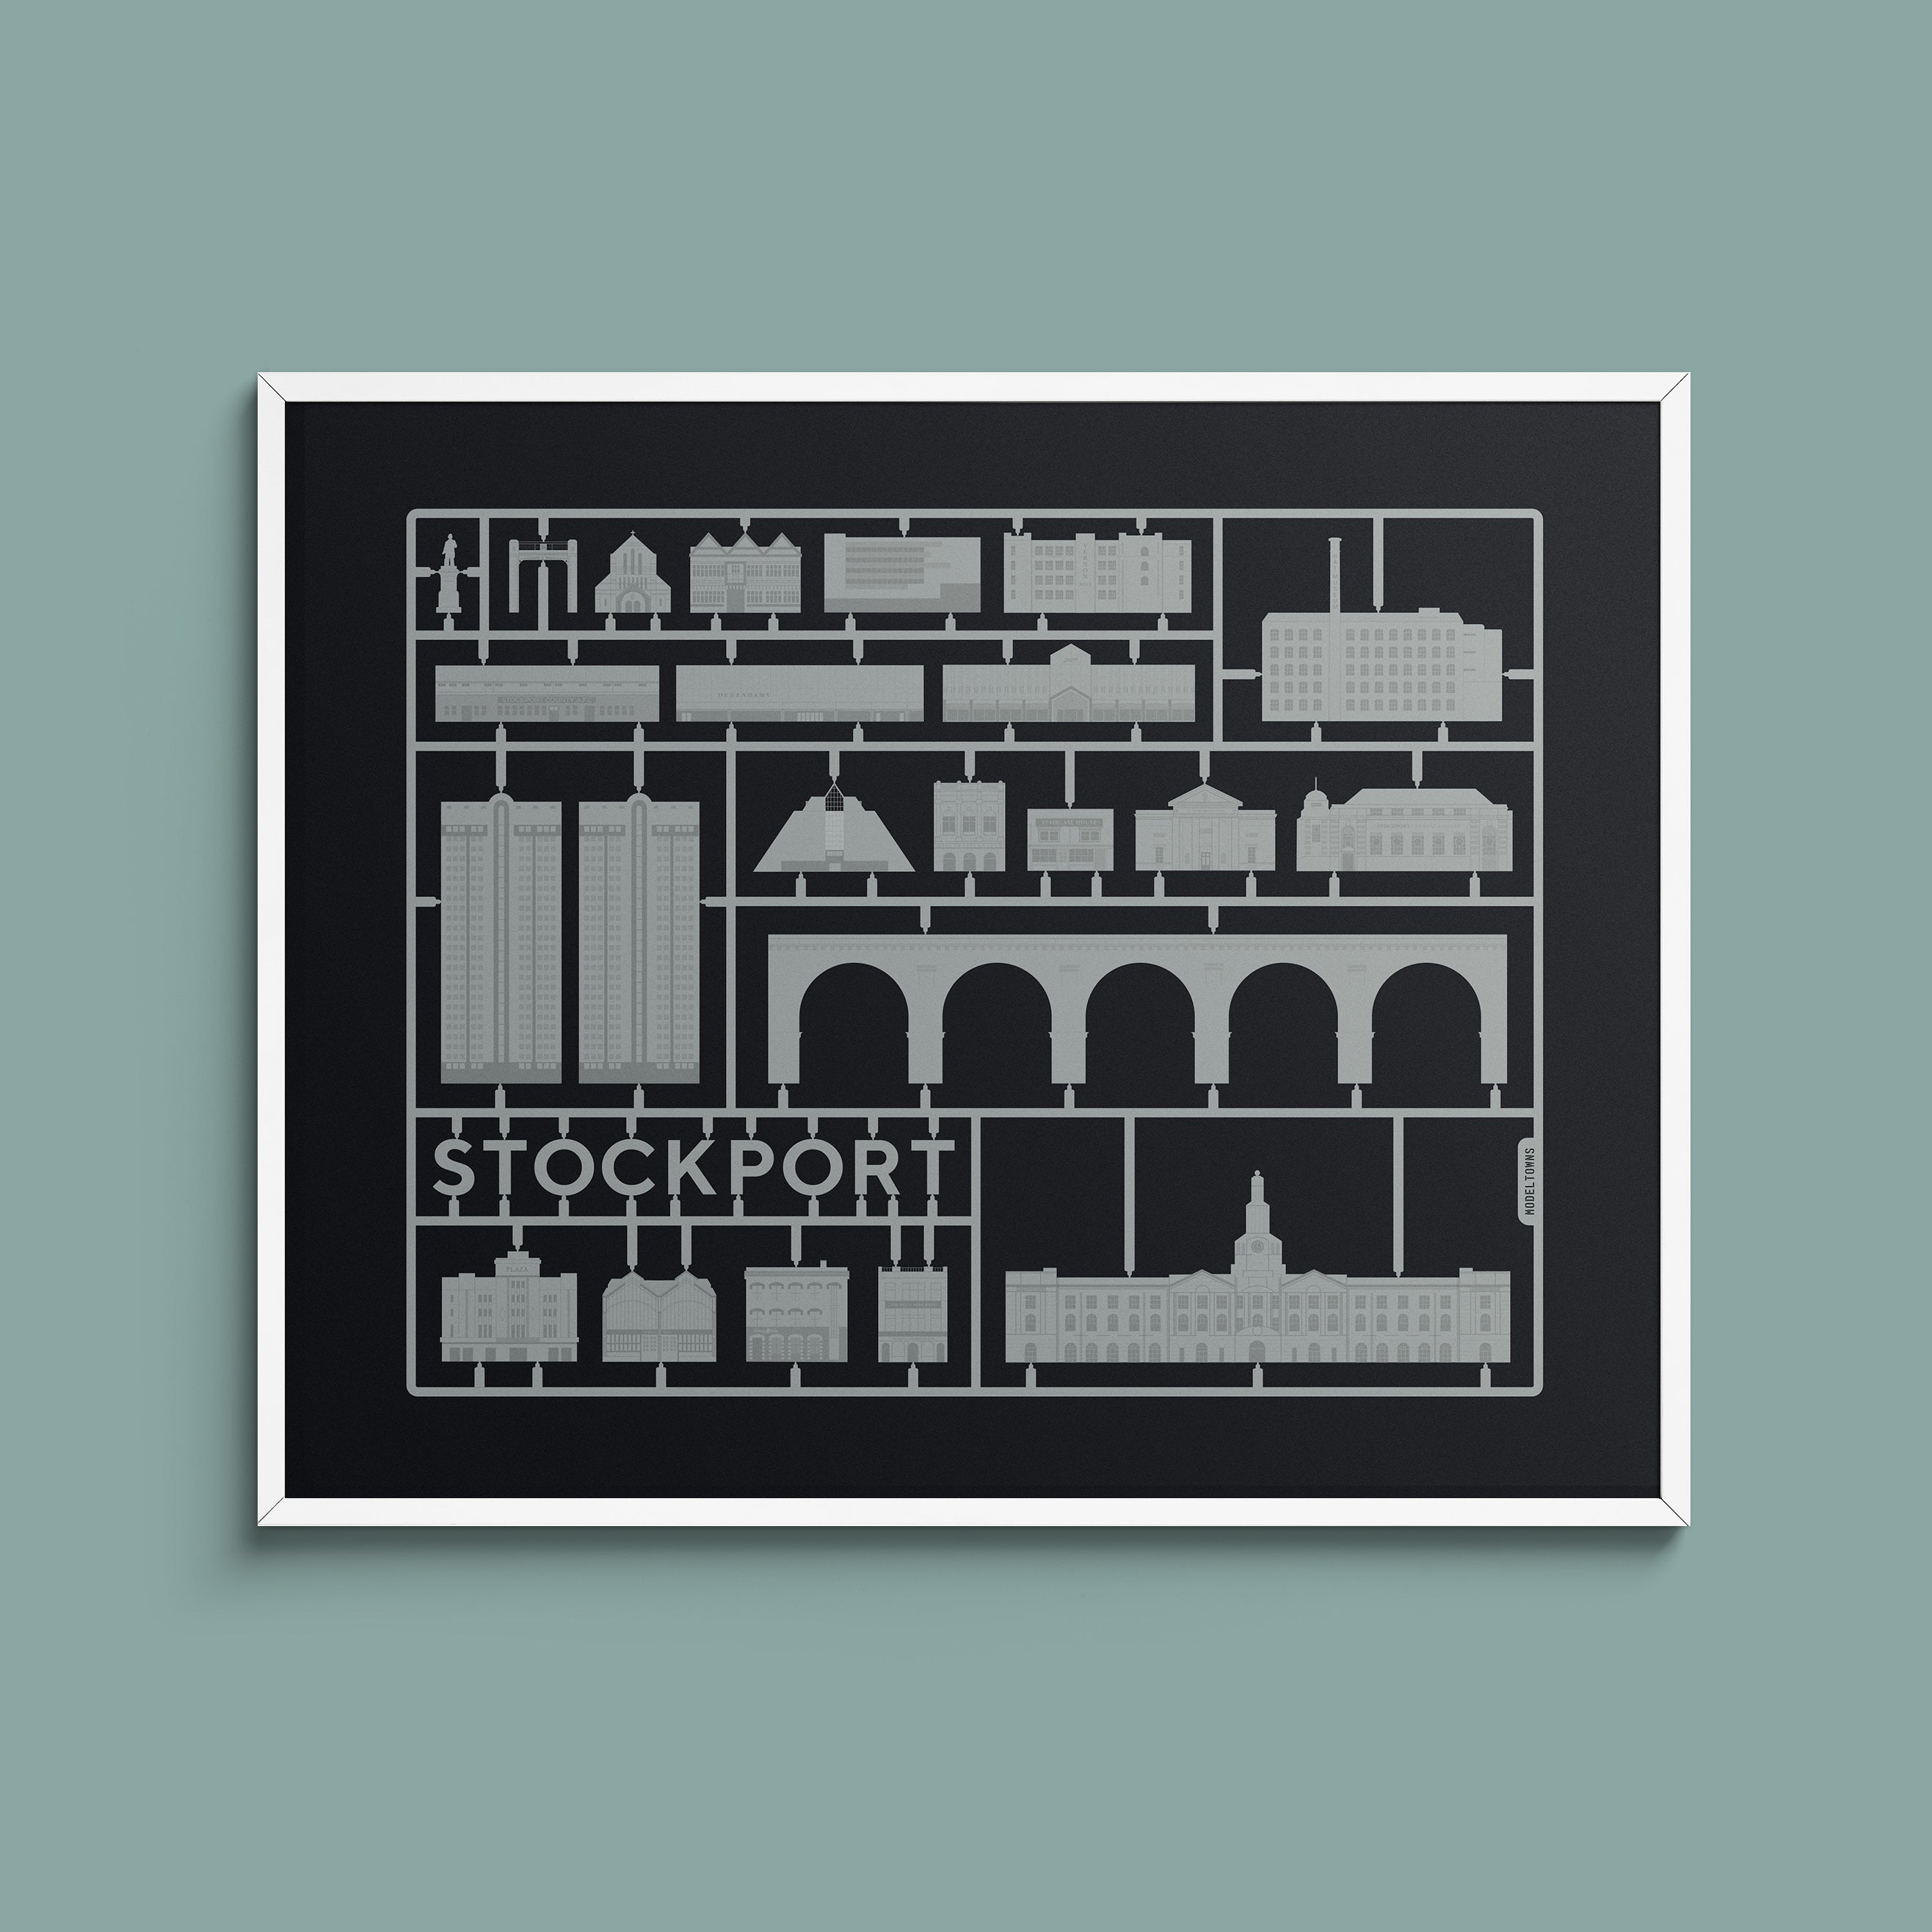 Model Towns – Stockport